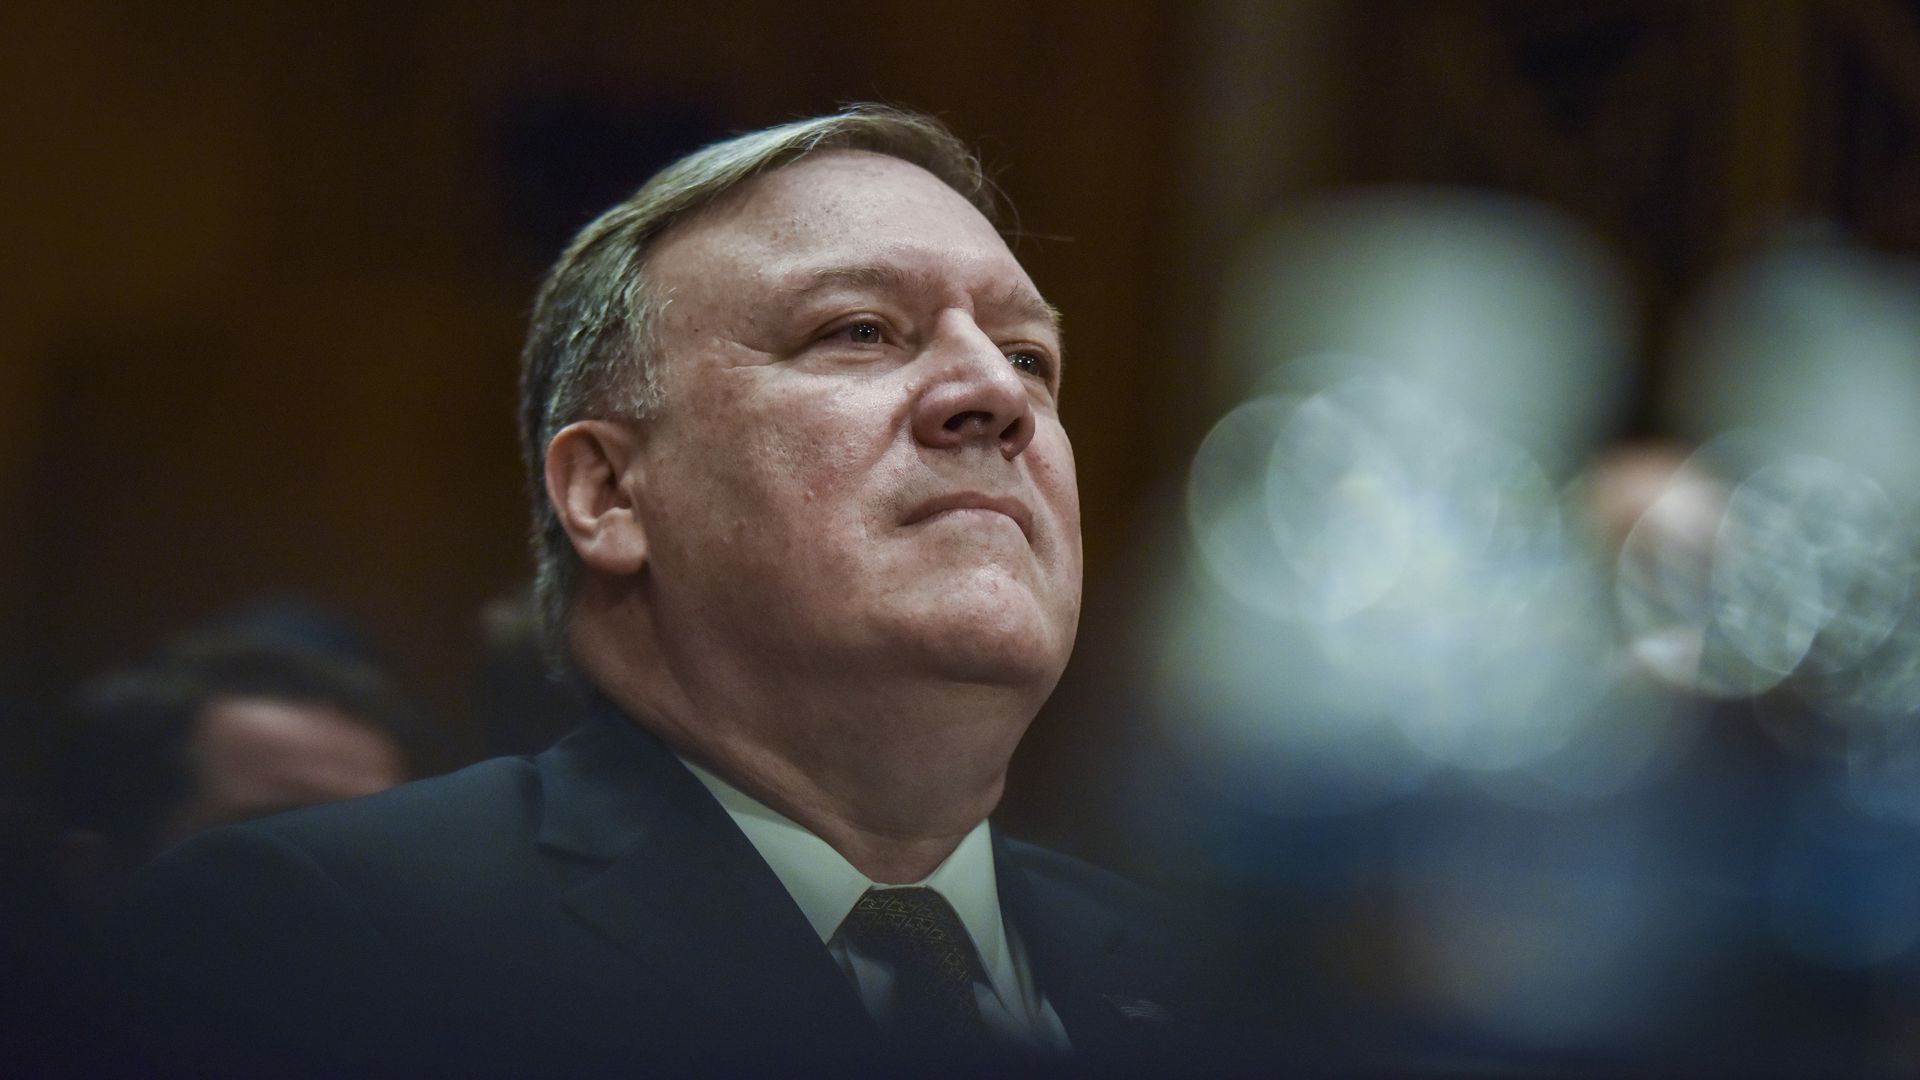 On Wednesday, Pompeo tweeted that protests are growing in Iran